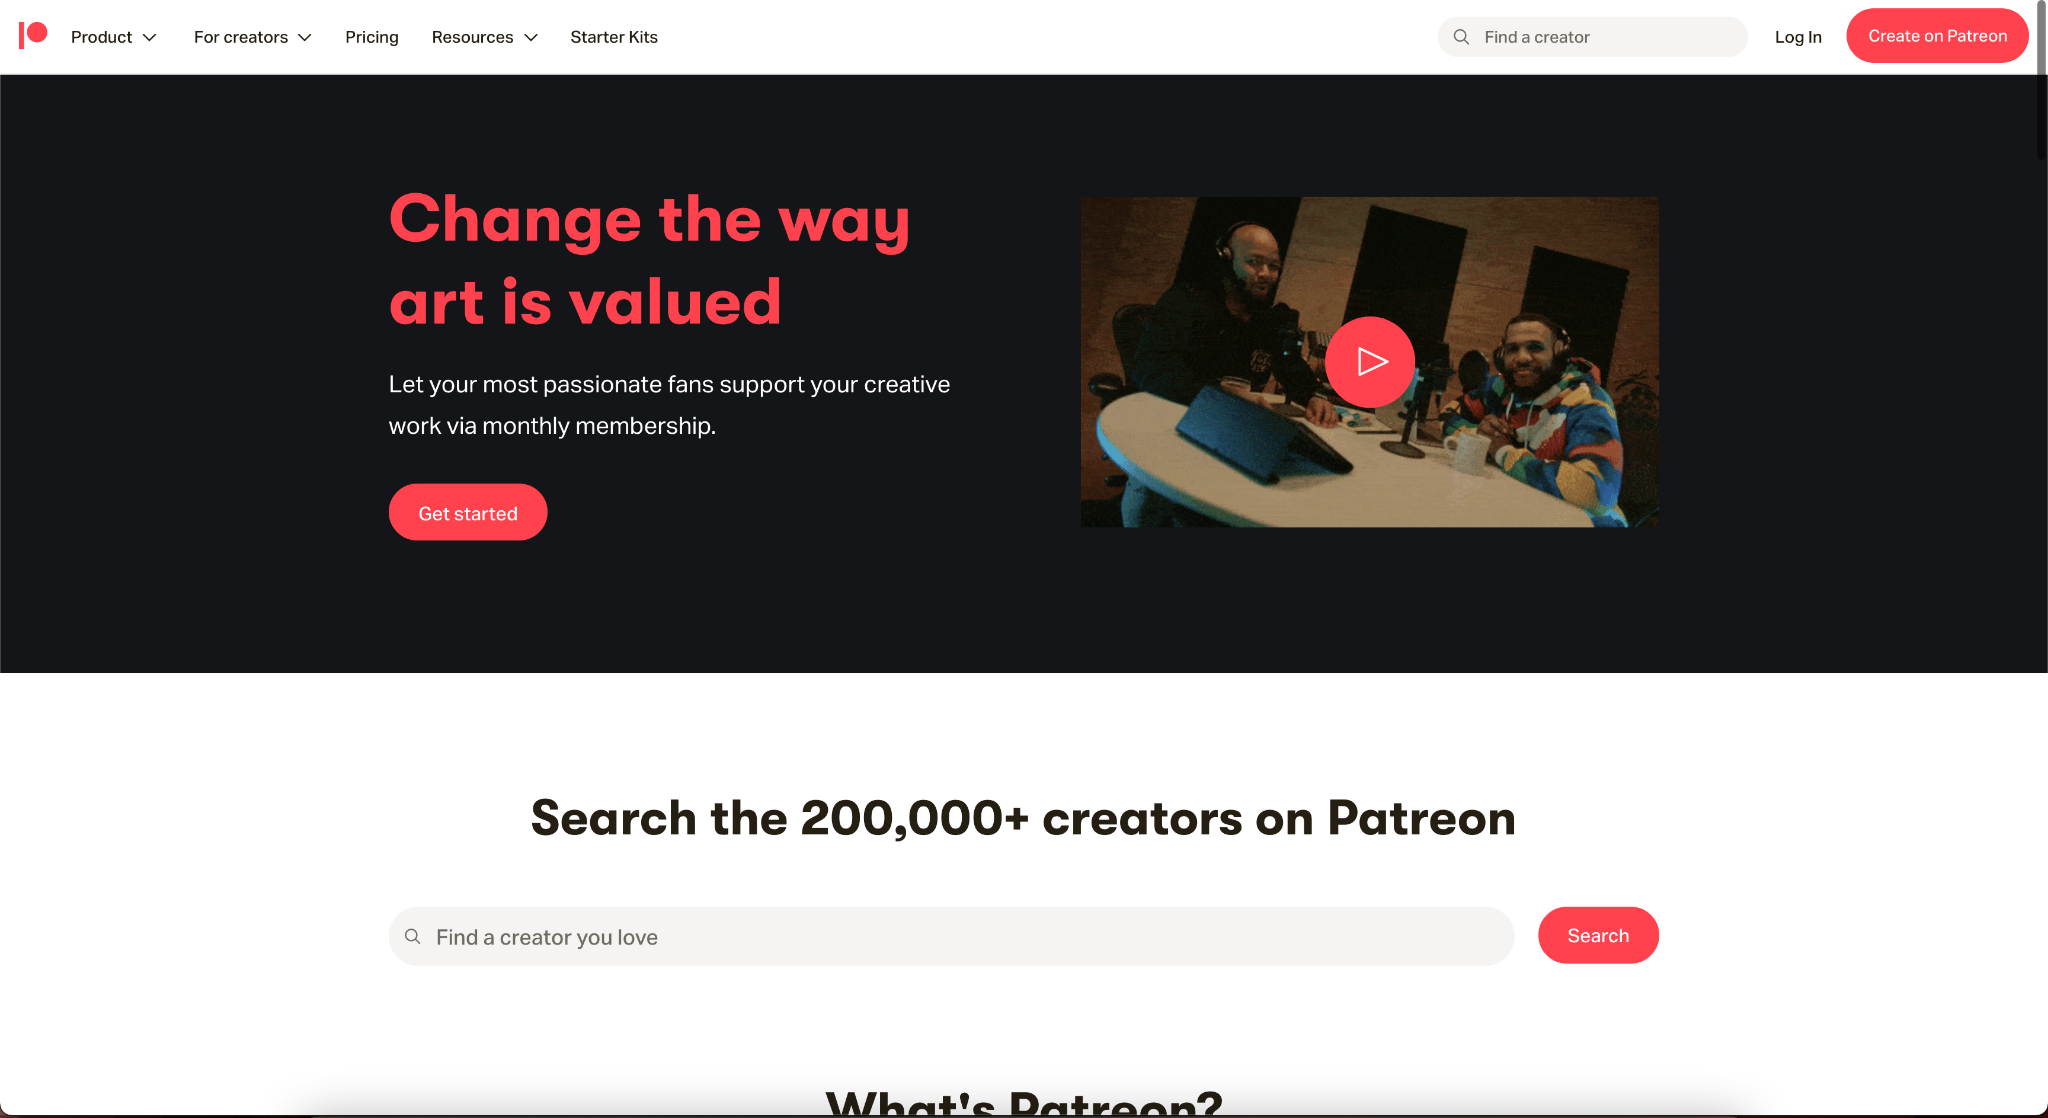 What Is Patreon And How Does It Work?